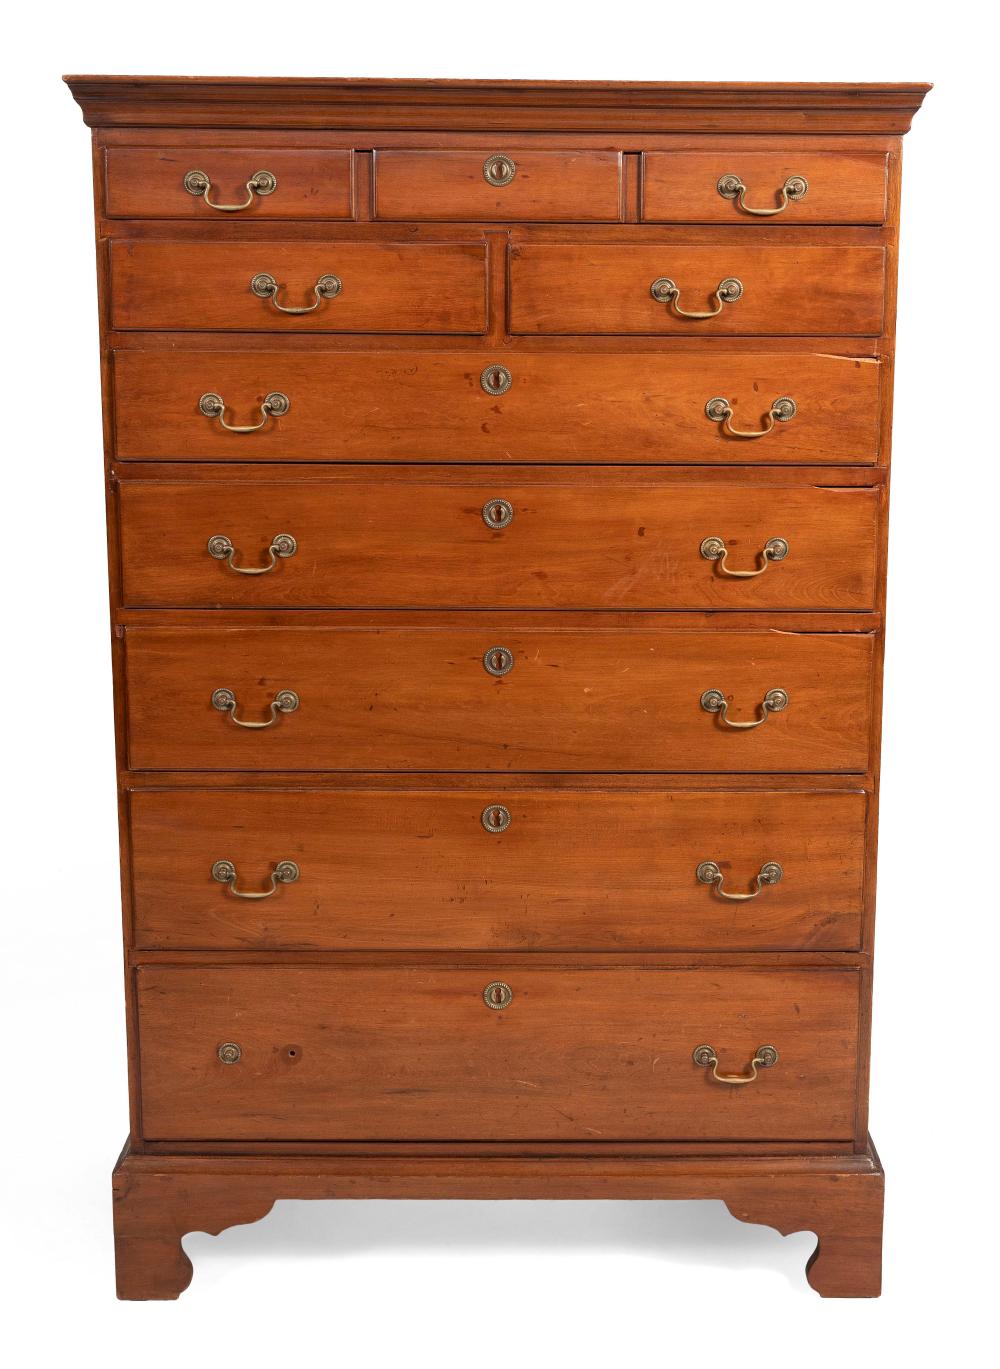 CHIPPENDALE TALL CHEST CONNECTICUT  35002b